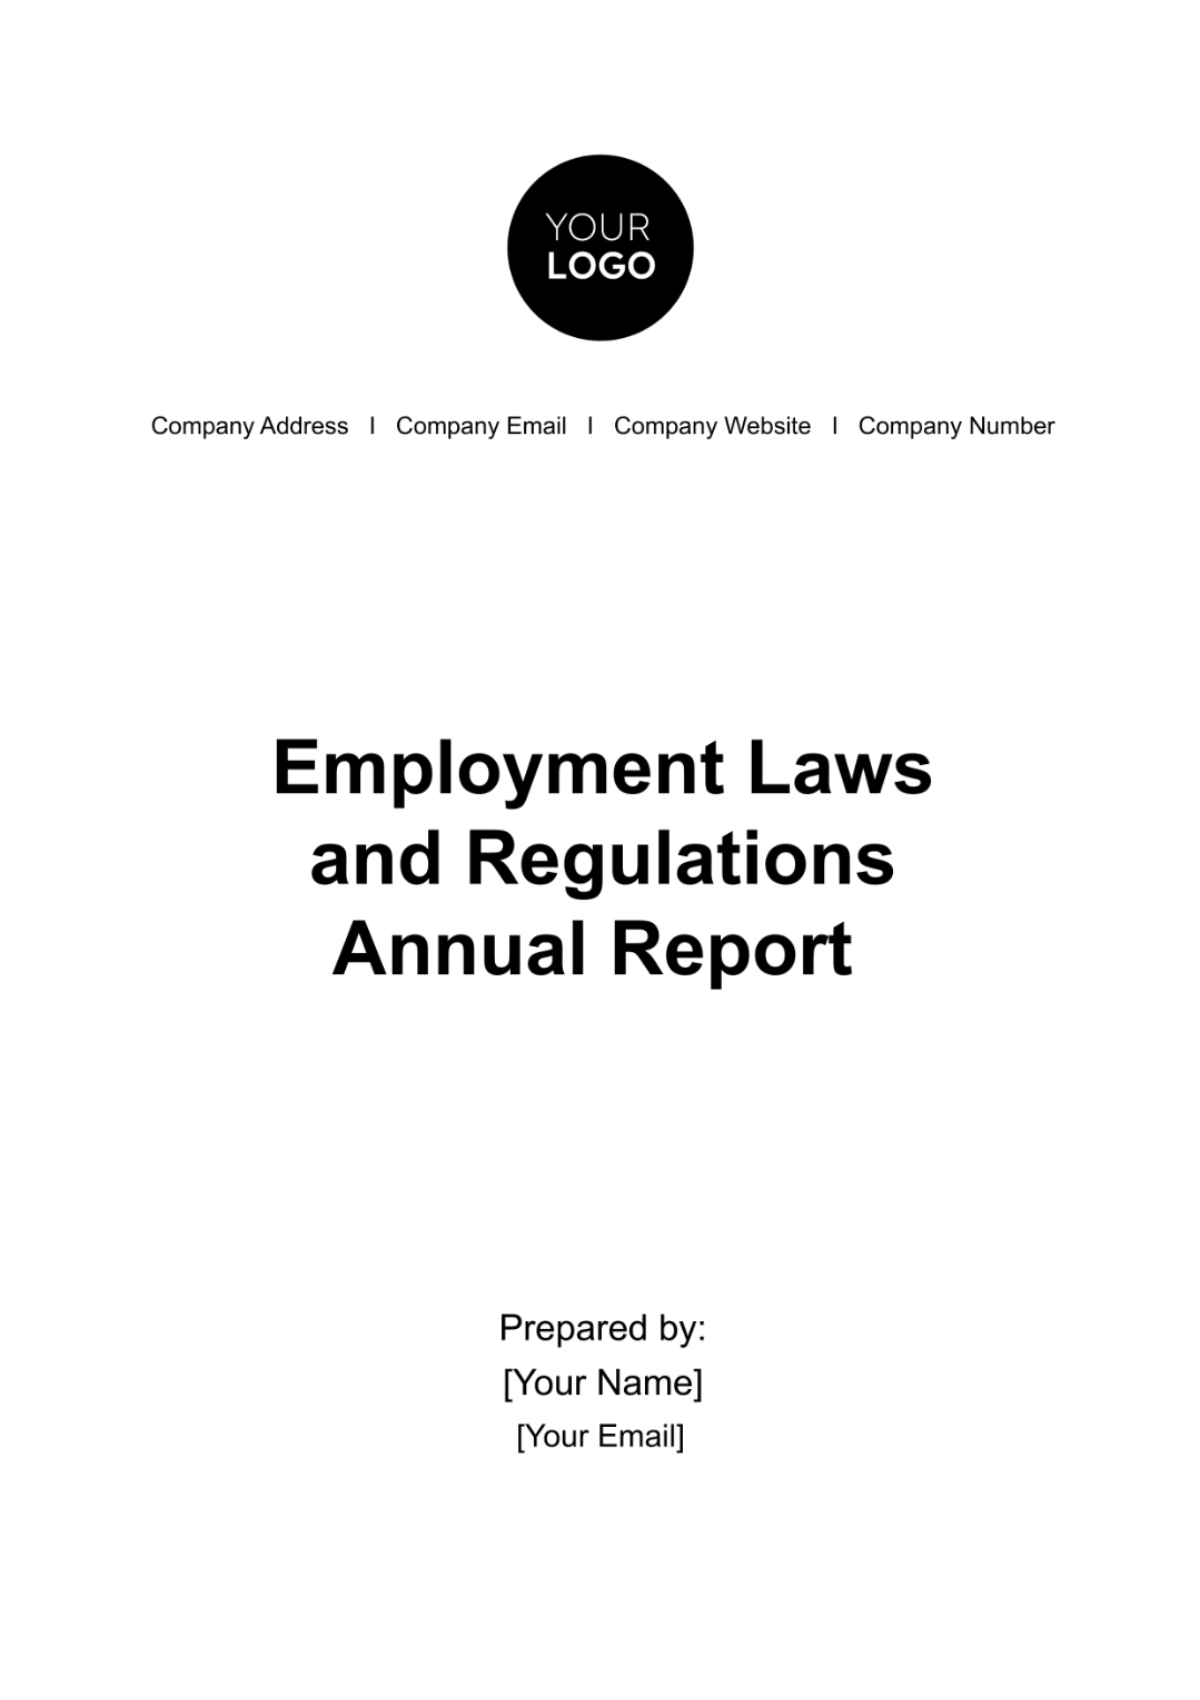 Employment Laws and Regulations Annual Report HR Template